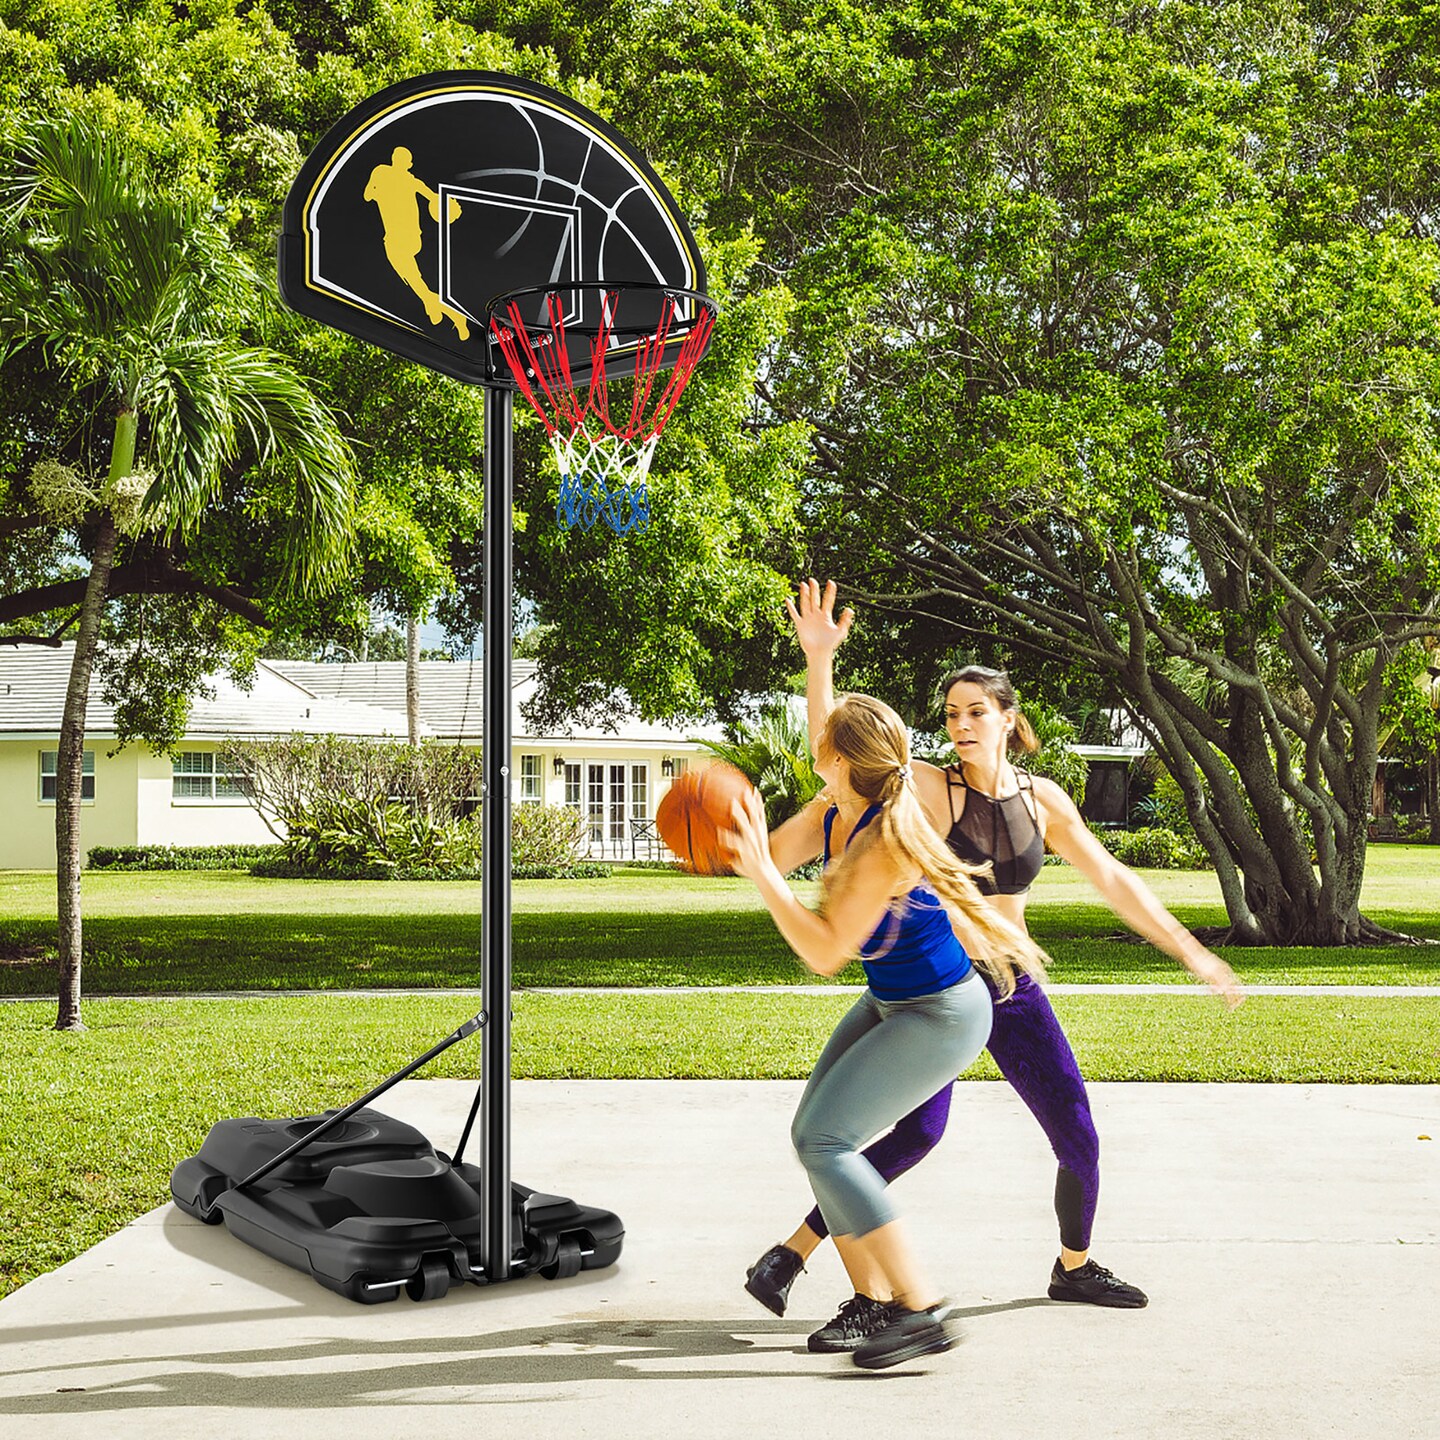 Costway 4.25-10FT Portable Adjustable Basketball Goal Hoop System with 2 Nets Fillable Base